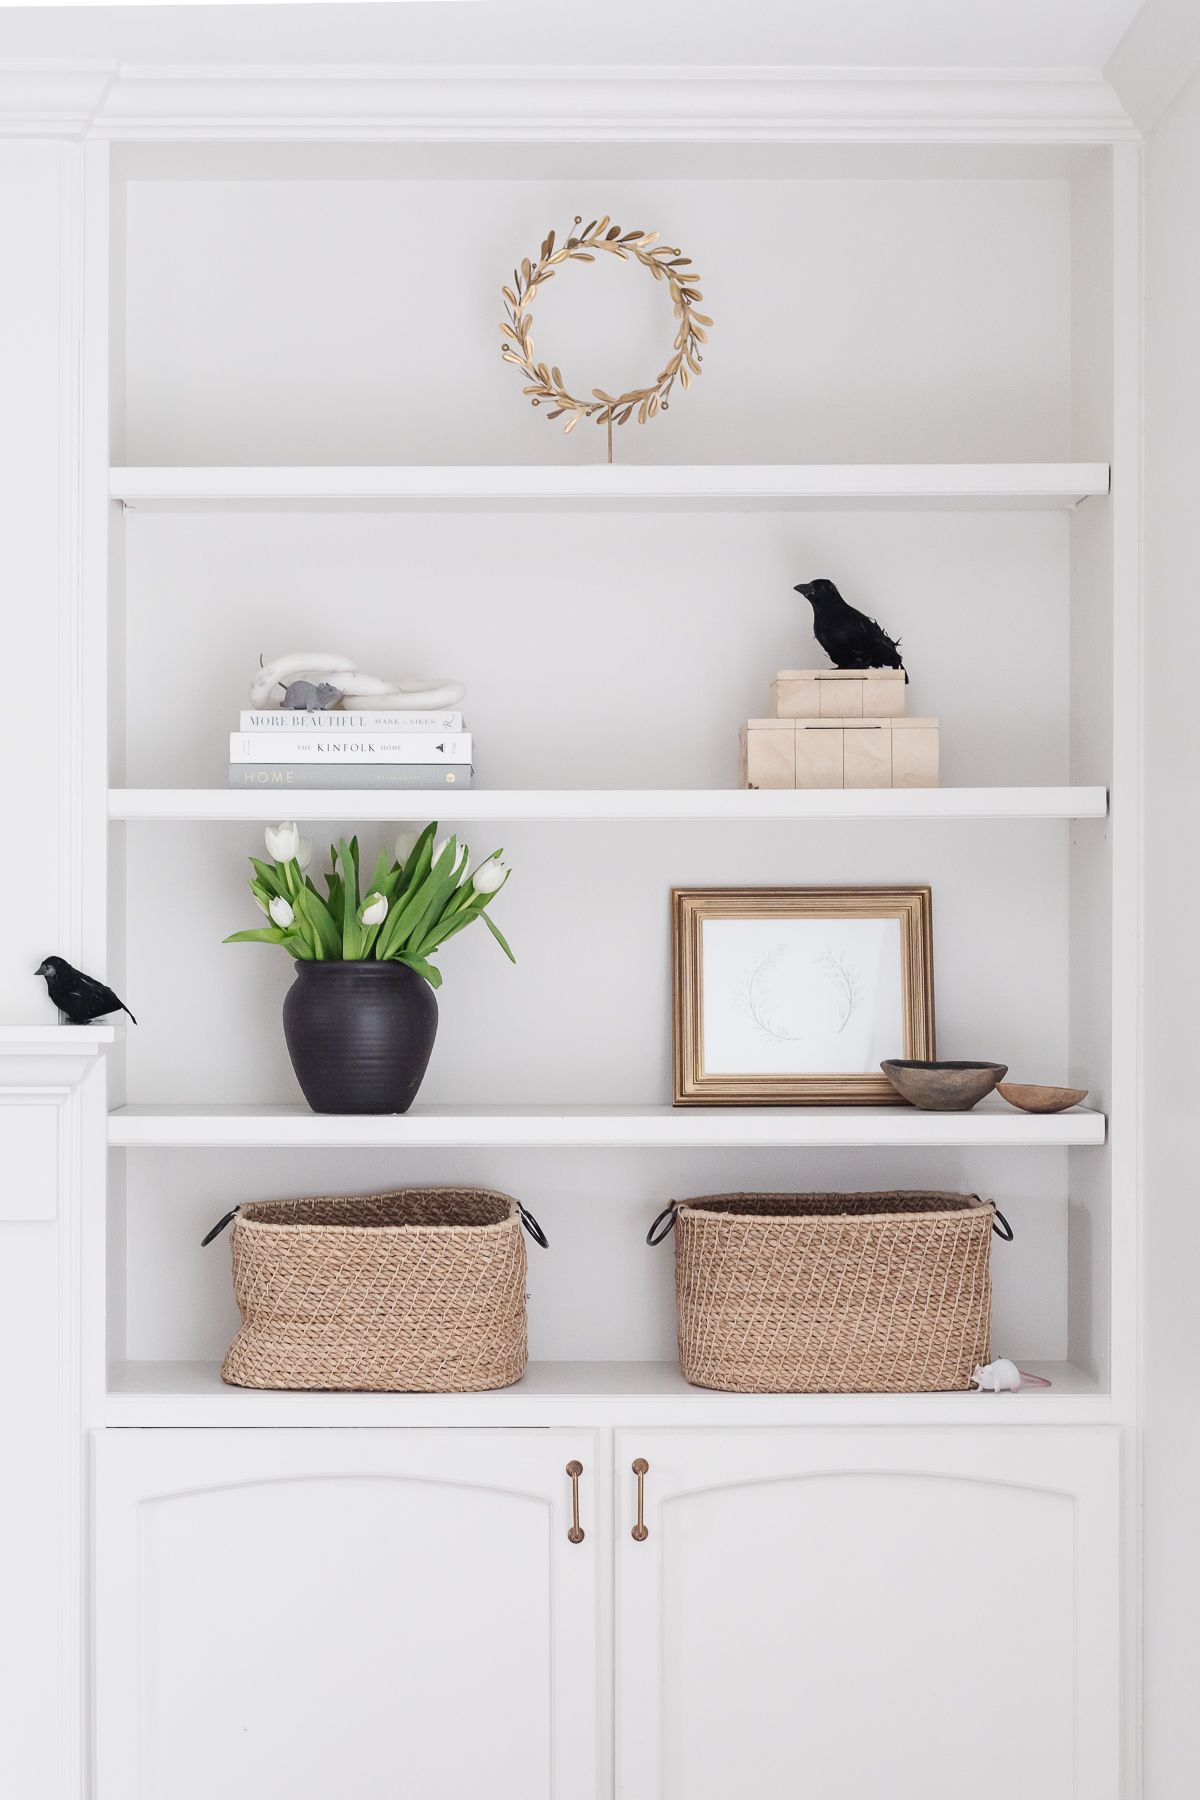 Black crows decorating a white built in bookshelf